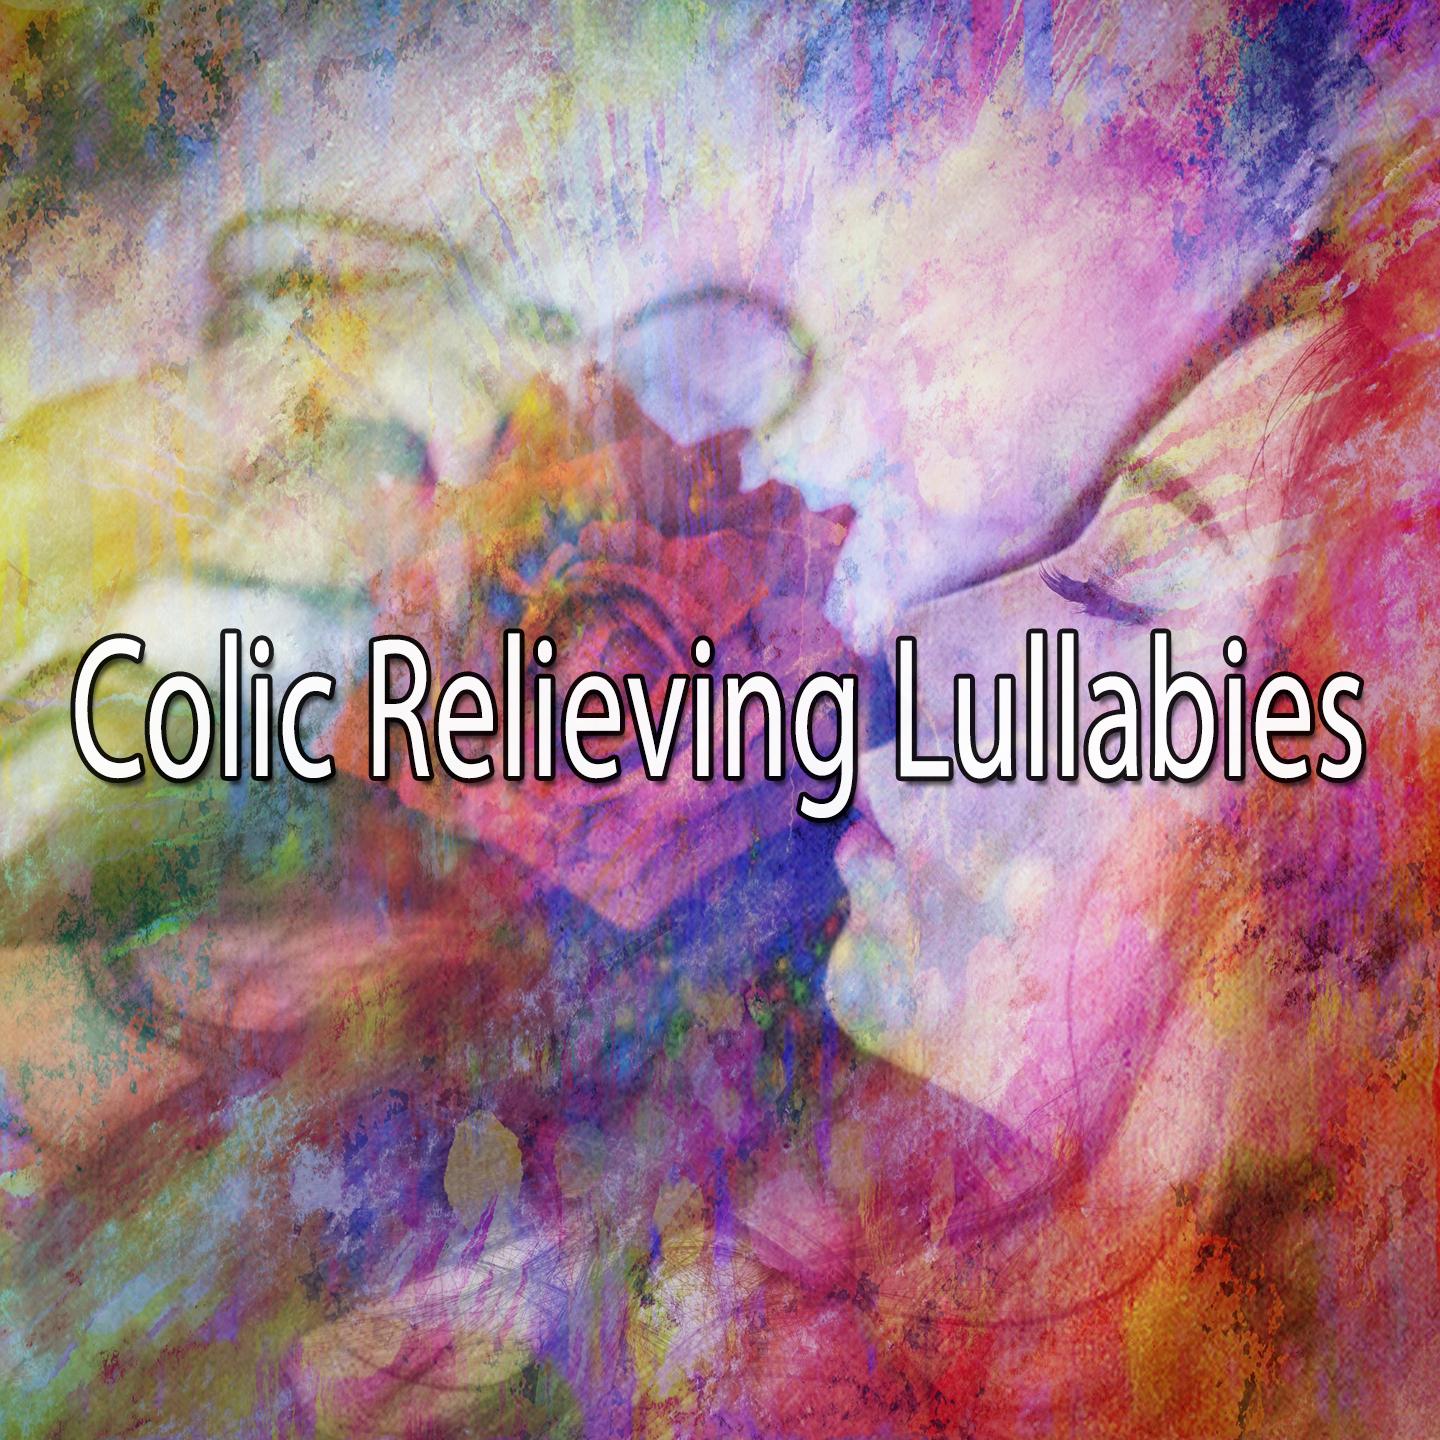 Colic Relieving Lullabies